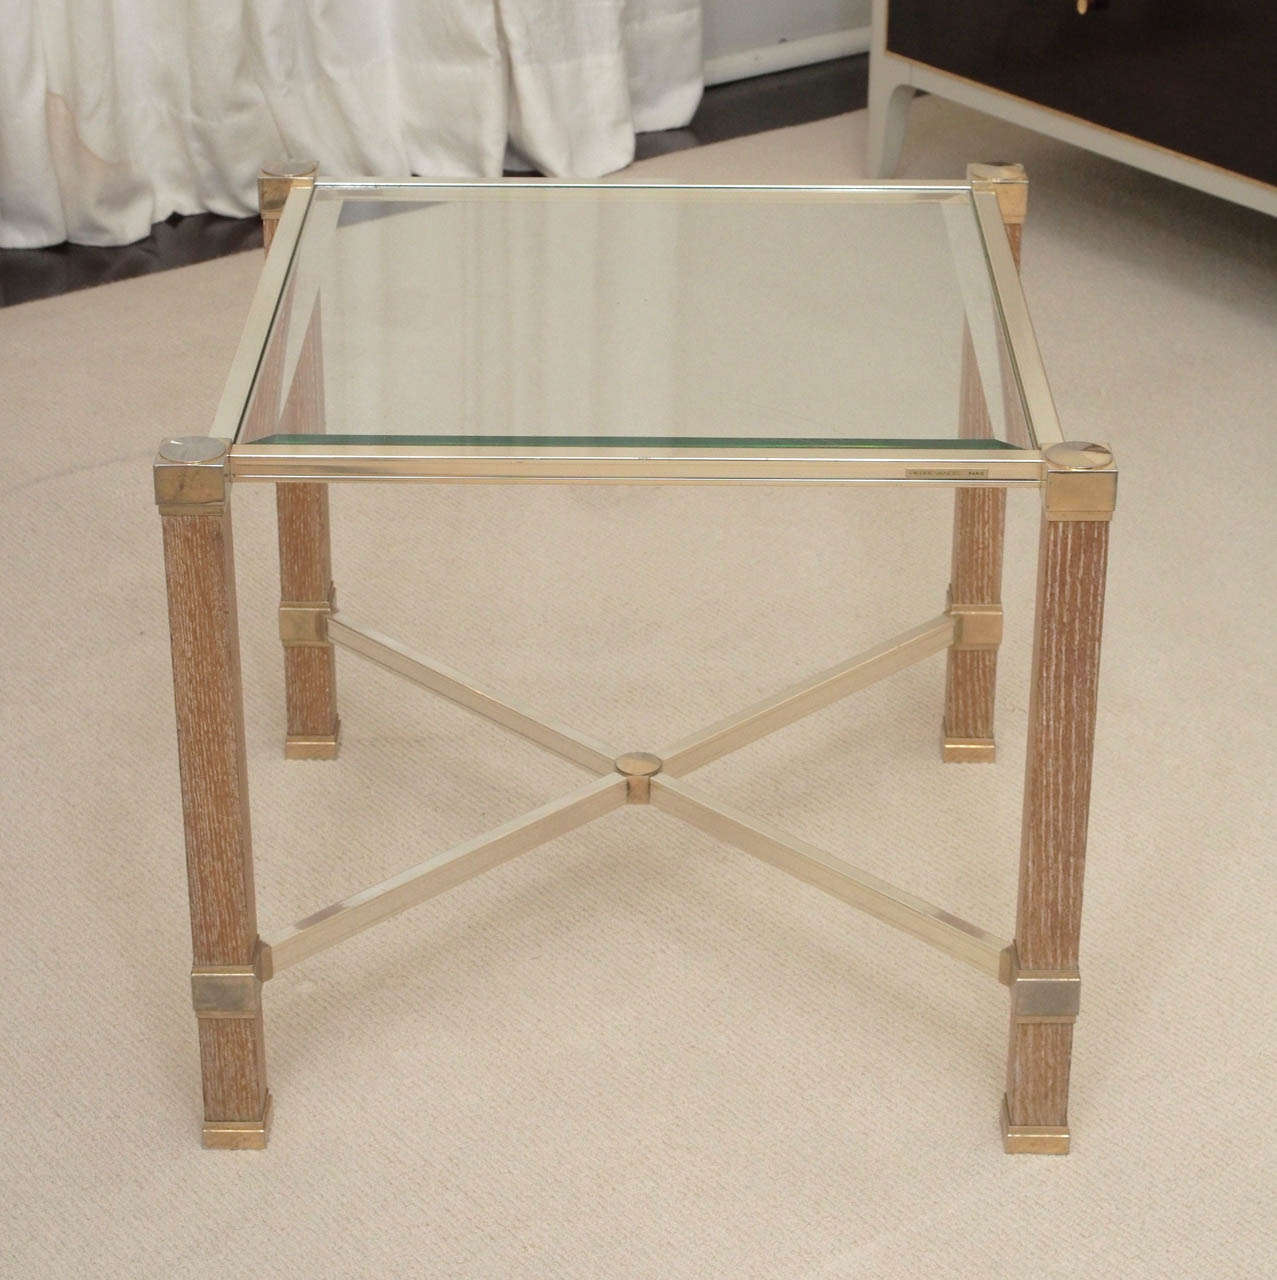 Two square side tables with oak ceruse legs and brass plated details by Pierre Vandel, Paris; so marked; each with beveled glass plateau